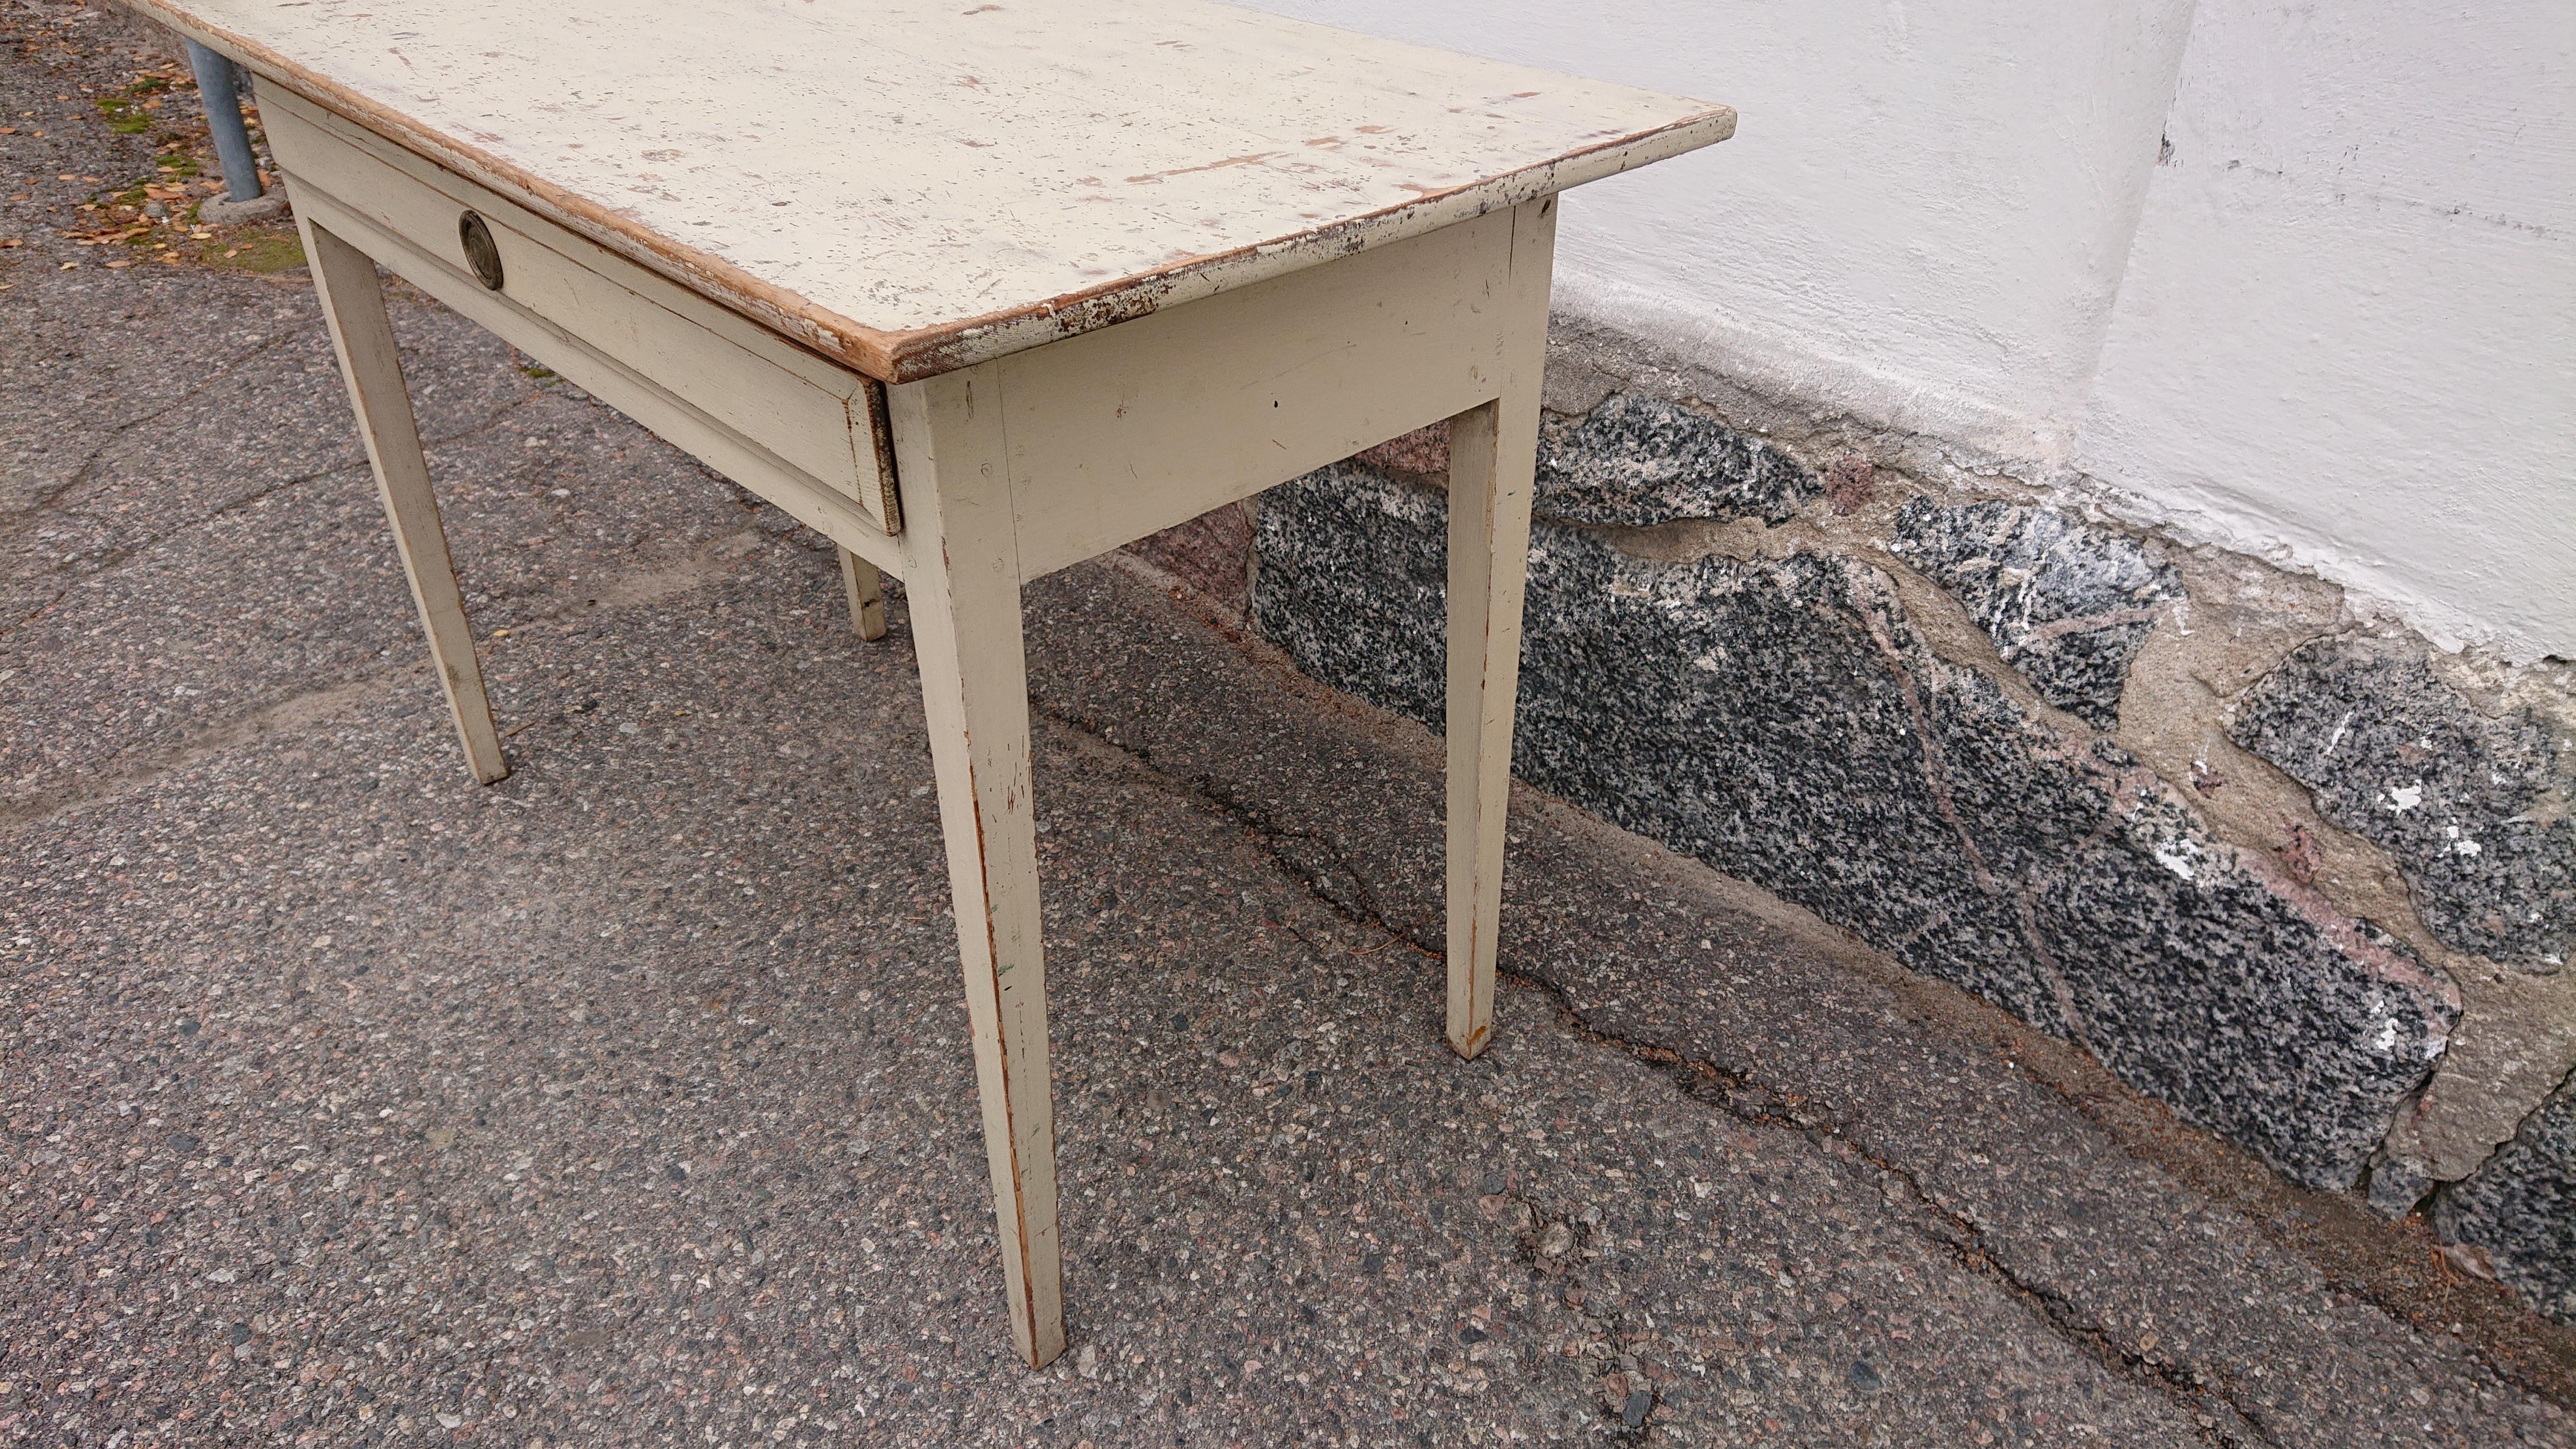 19th century Swedish Gustavian desk from Lulea Norrbotten, Northern Sweden.
A beautiful desk with nice propotion & fine condition.
Untouched base, the top is scraped and washed to its original paint.
Hardware original to the piece.
Made in painted